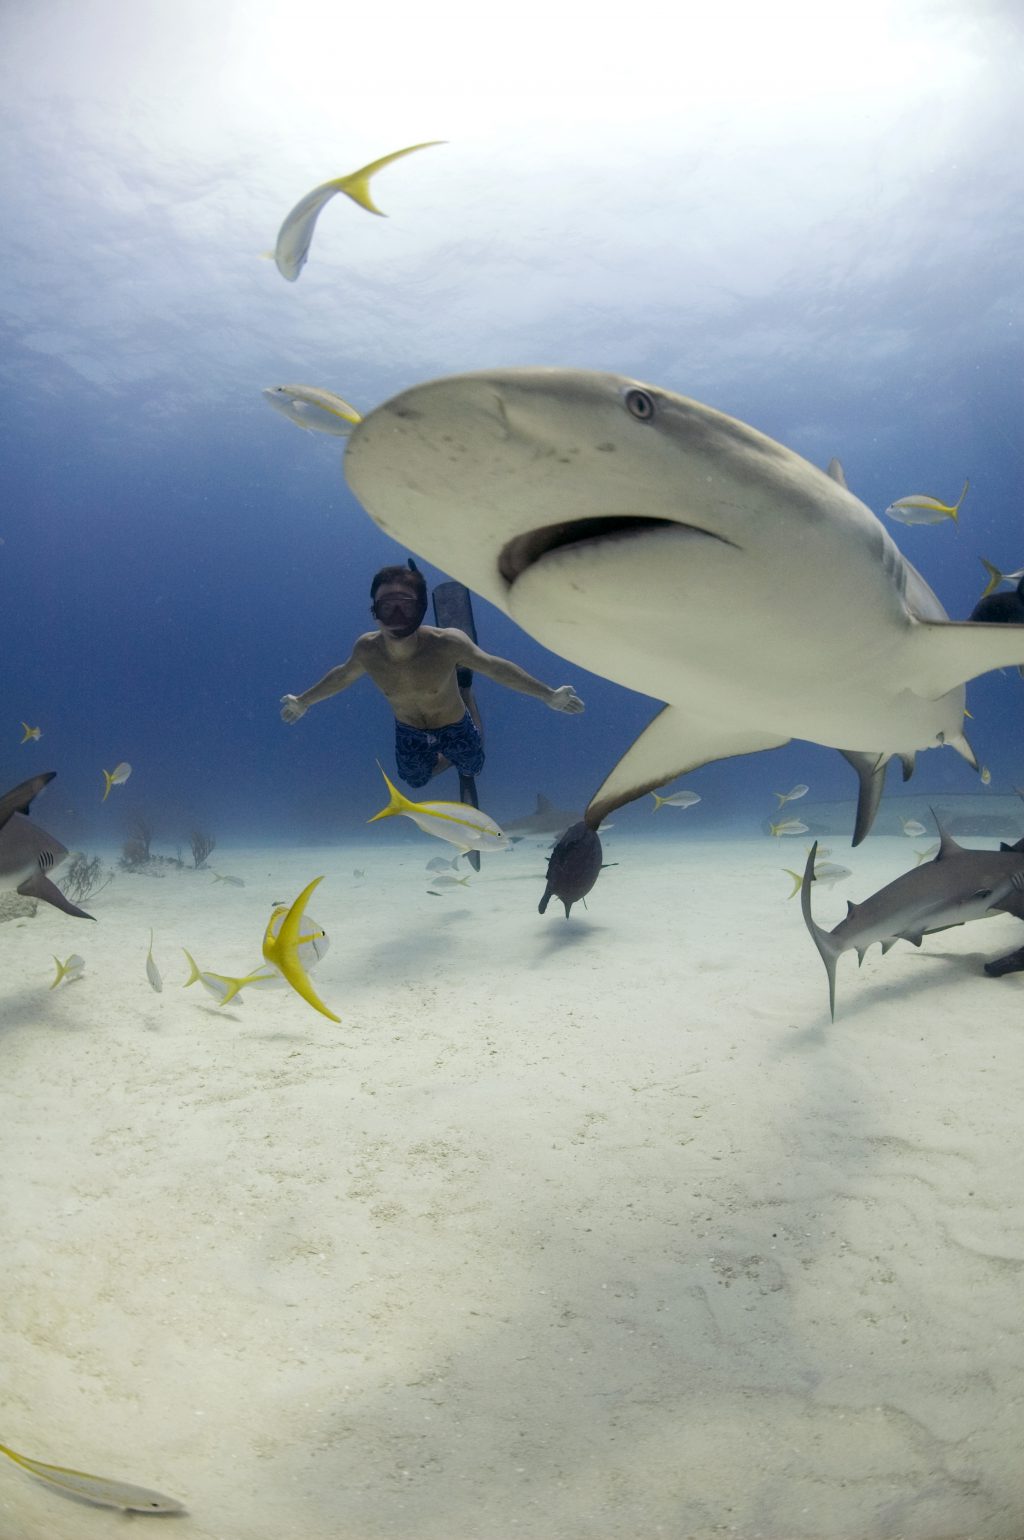 Rob diving with Caribbean reef shark